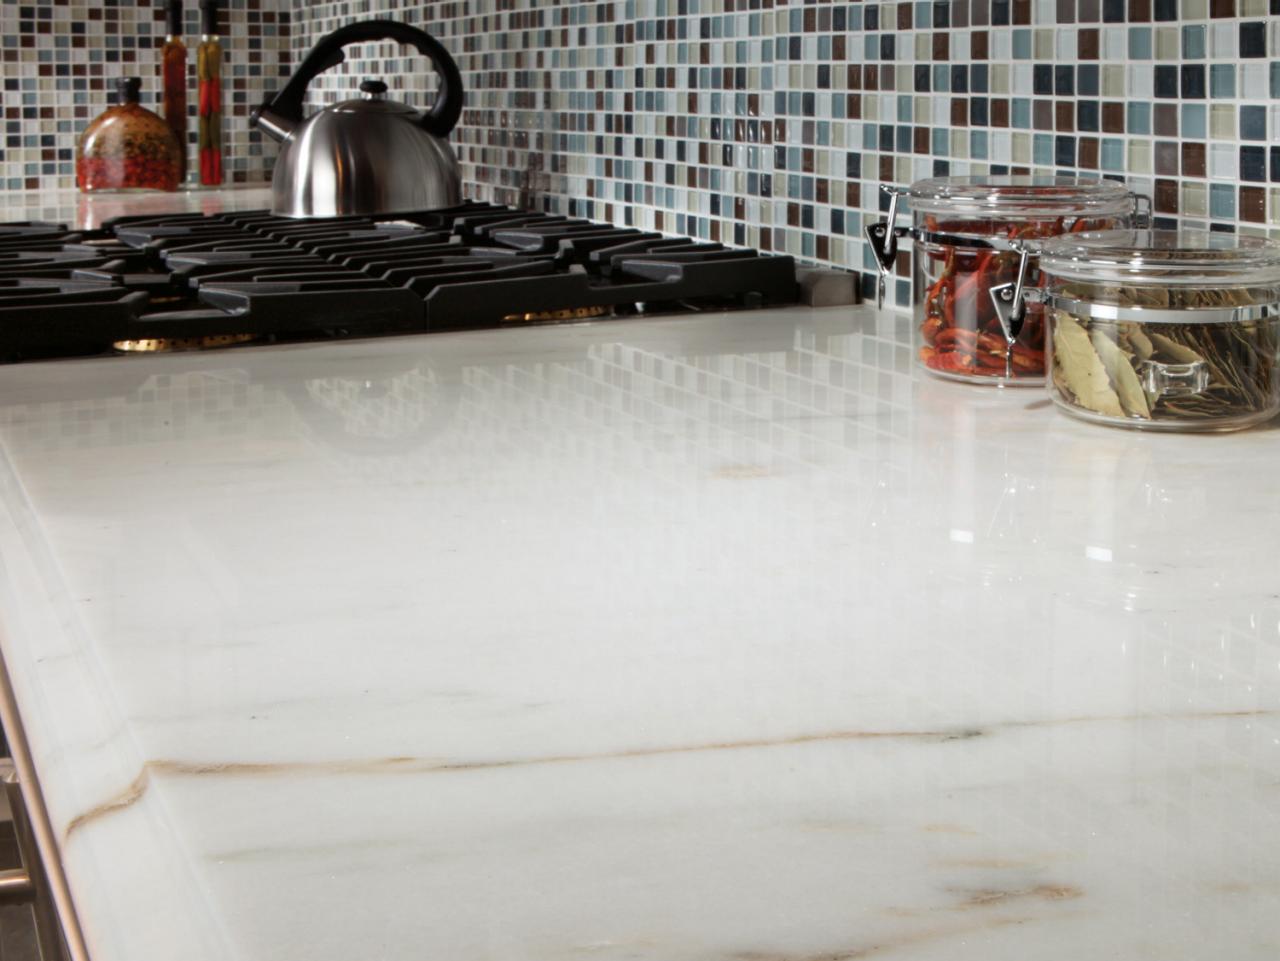 Marble Kitchen Countertop Options, Are White Countertops In Style